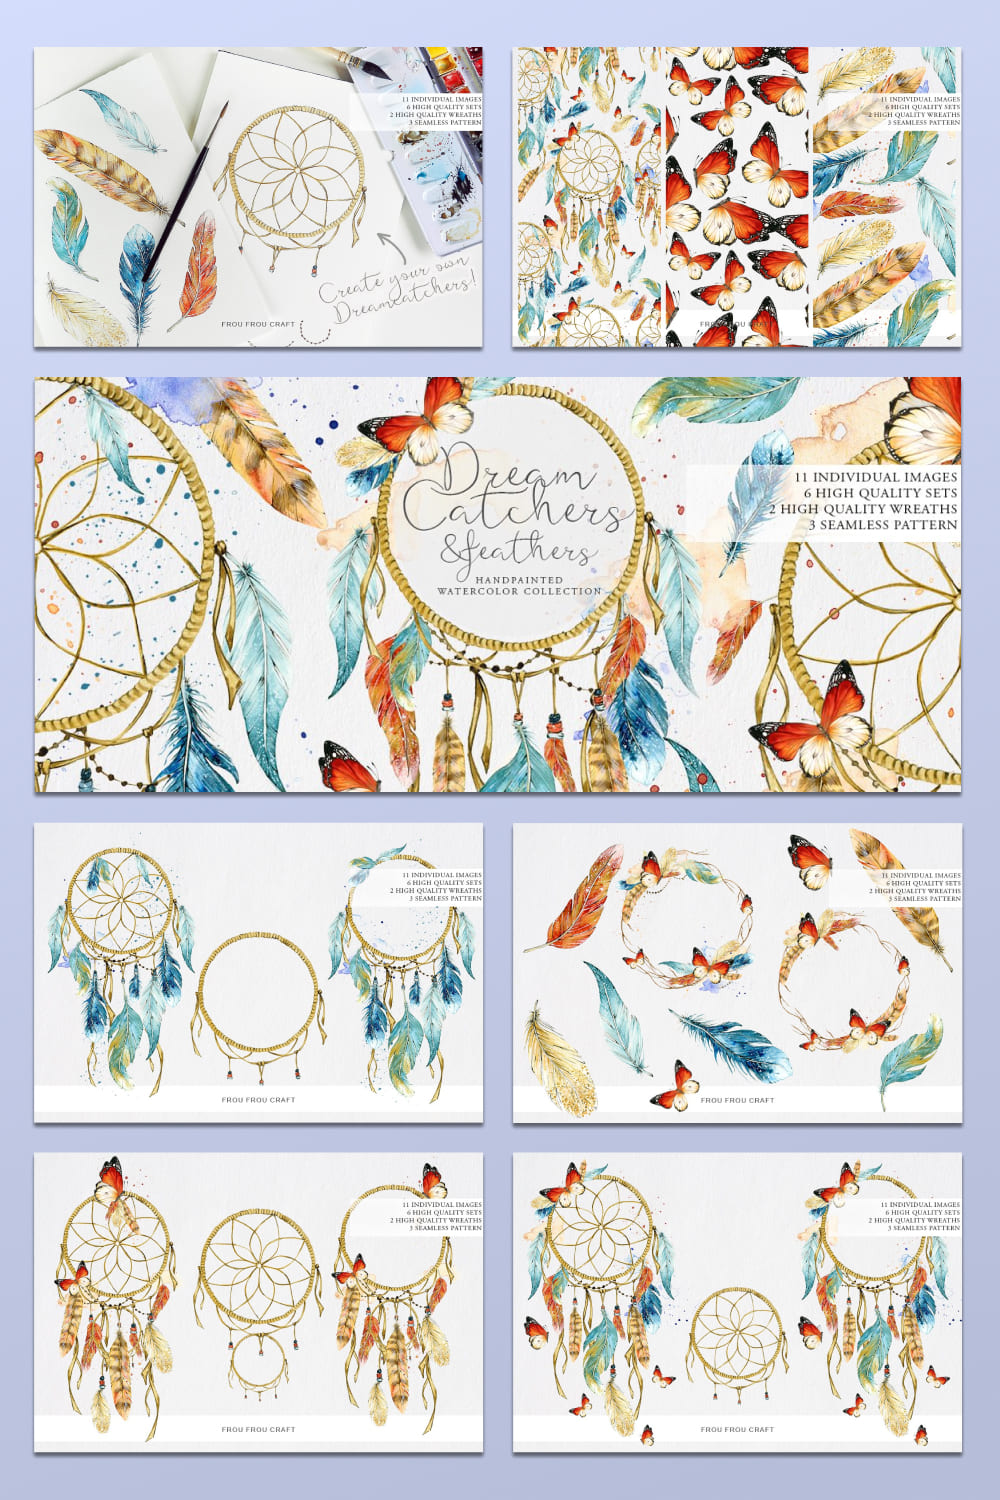 dream catchers and feathers hand drawn clip art.